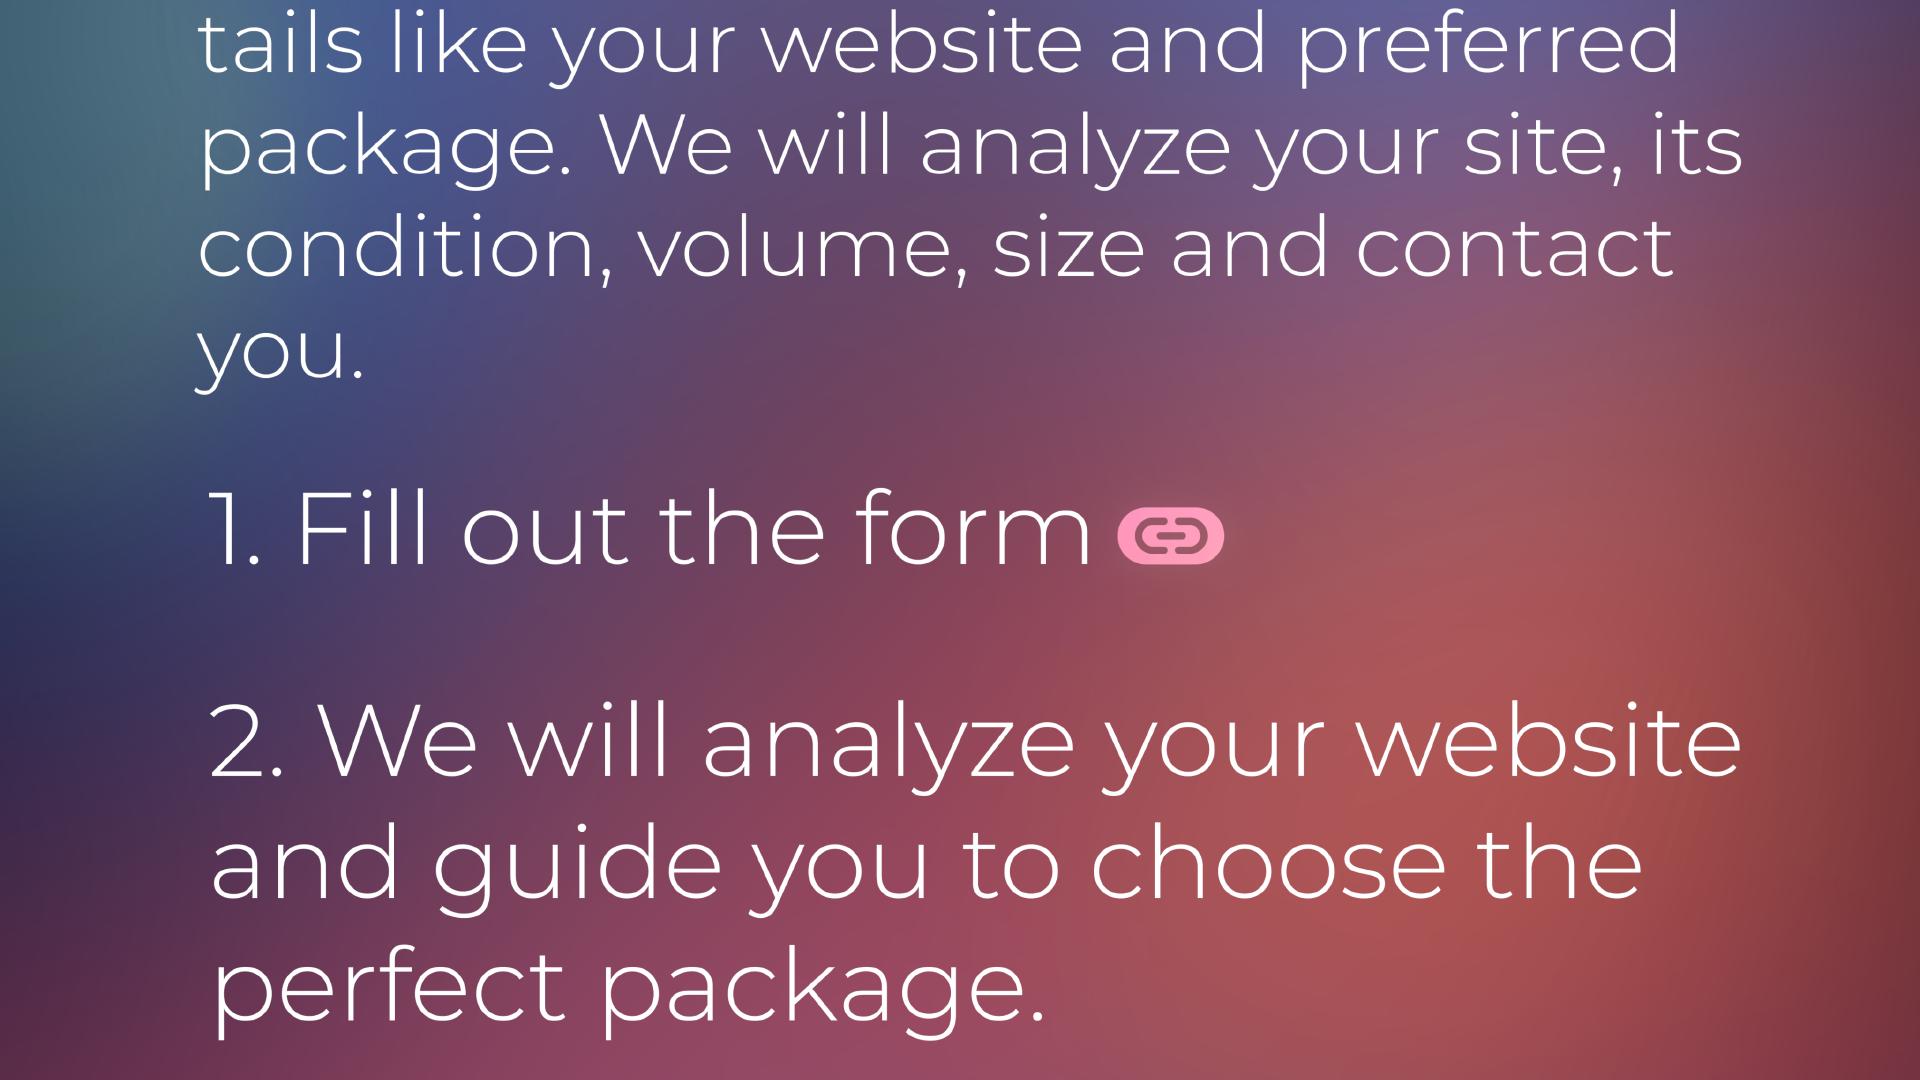 Just fill out the form with some details like your website and preferred package. We will analyze your site, its condition, volume, size and contact you. 1. Fill out the form. 2. We will analyze your website and guide you to choose the perfect package. 3. You confirm the details, and after the payment, we begin our successful cooperation.